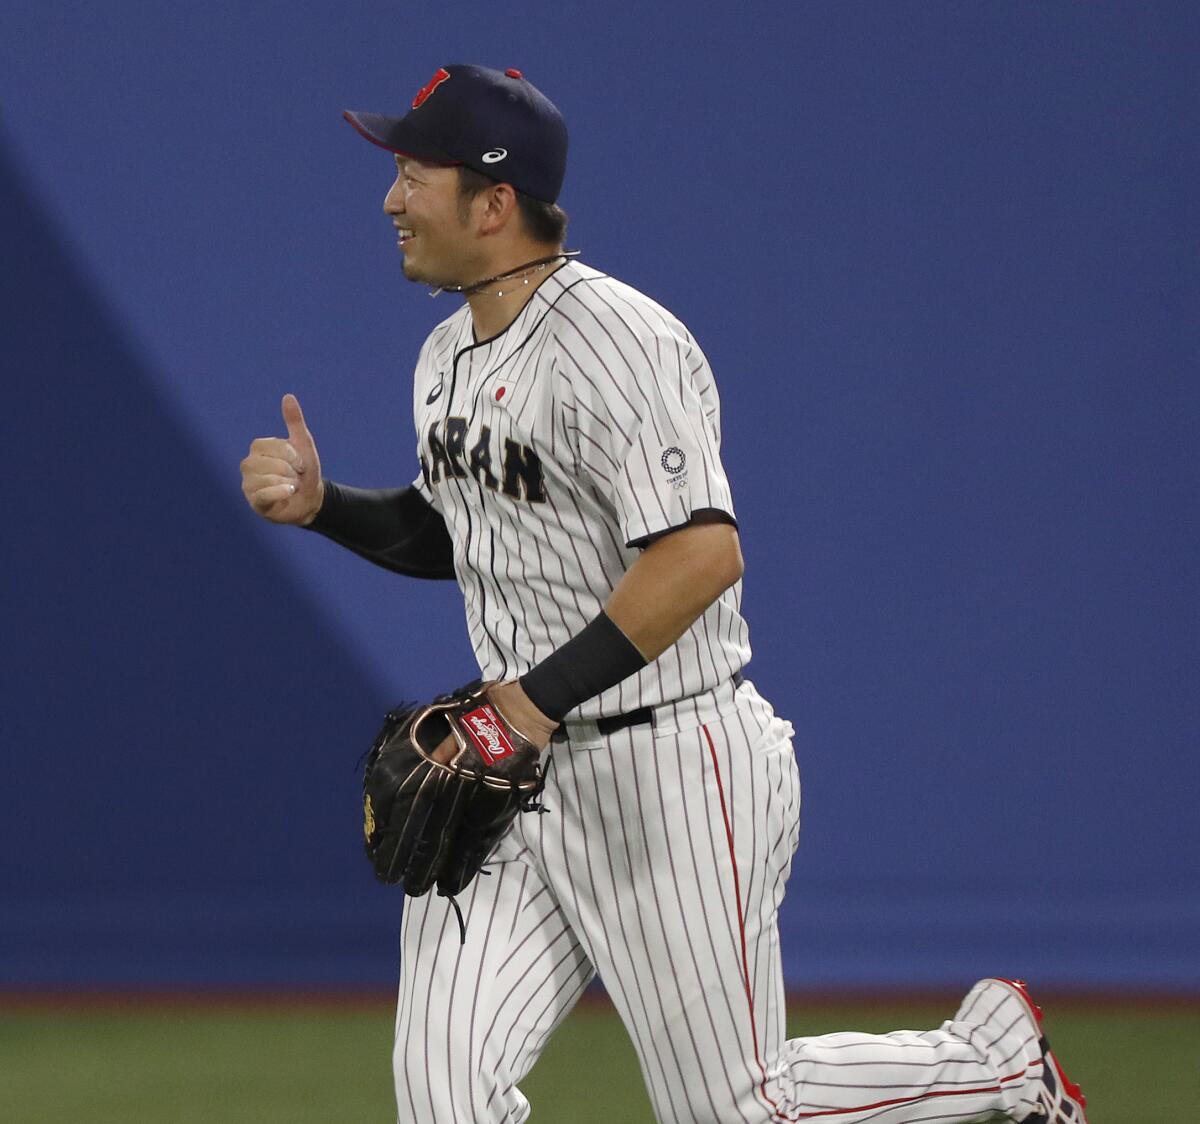 Japan outfielder Seiya Suzuki gives a thumbs up while running on the field